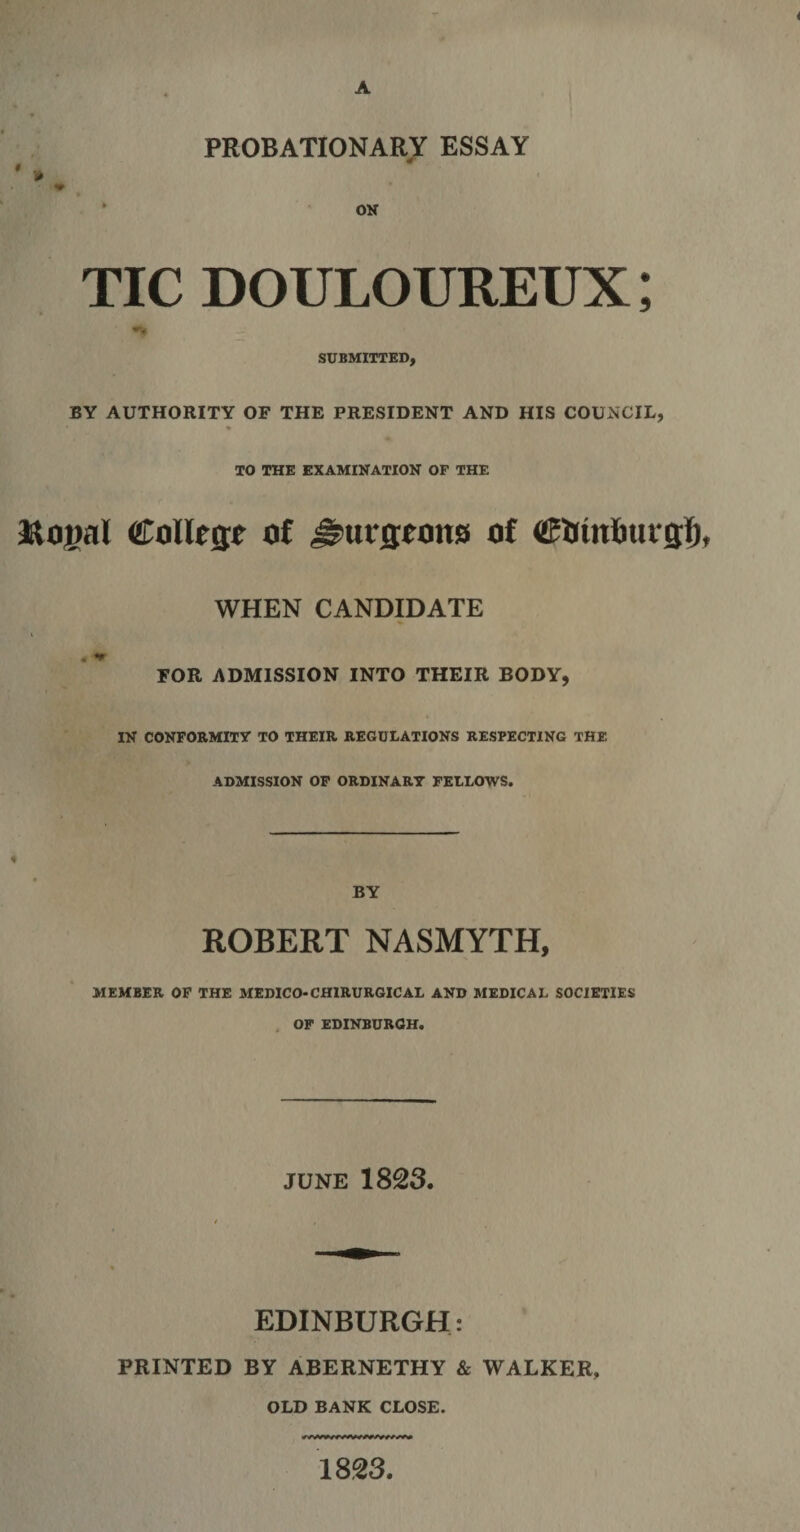 PROBATIONARY ESSAY TIC DOULOUREUX; SUBMITTED, BY AUTHORITY OF THE PRESIDENT AND HIS COUNCIL, * TO THE EXAMINATION OF THE College of Hurstons of (SJrinfcurgf) WHEN CANDIDATE FOR ADMISSION INTO THEIR BODY, IN CONFORMITY TO THEIR REGULATIONS RESPECTING THE ADMISSION OF ORDINARY FELLOWS. BY ROBERT NASMYTH, MEMBER OF THE MEDICO-CH1RURGICAL AND MEDICAL SOCIETIES OF EDINBURGH. JUNE 1823. EDINBURGH: PRINTED BY ABERNETHY &amp; WALKER, OLD BANK CLOSE.